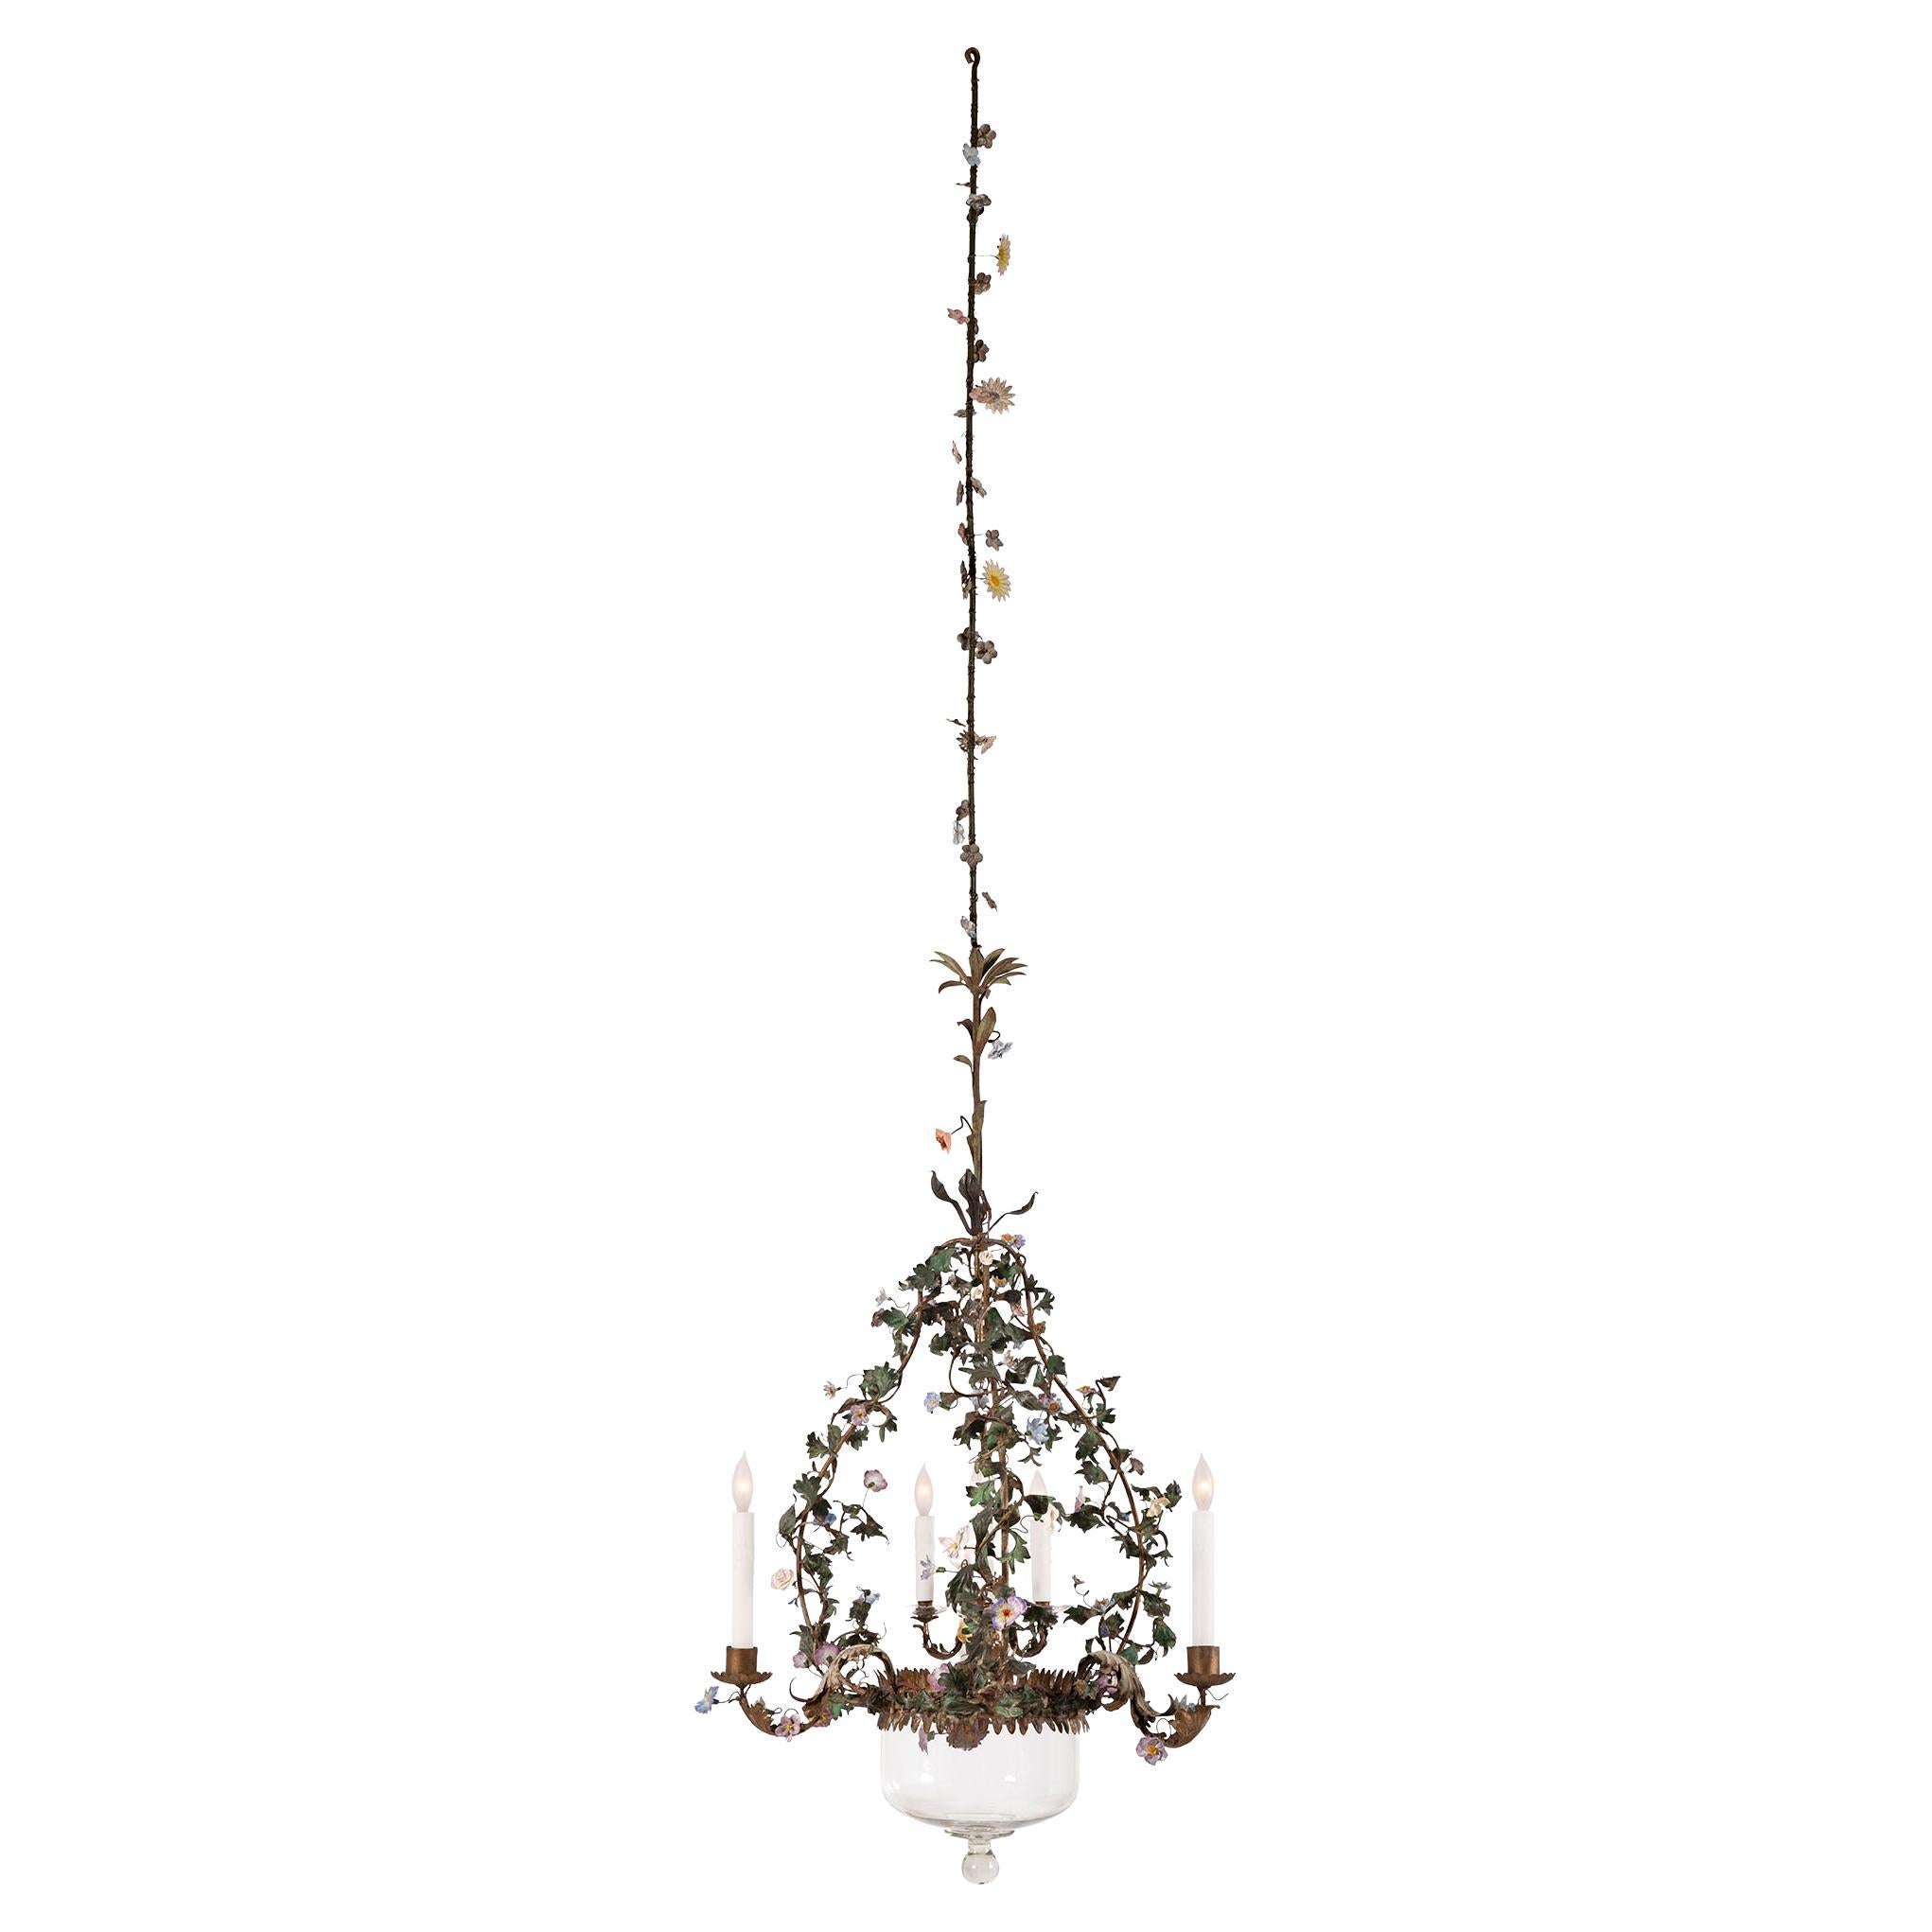 Italian 19th Century Painted and Gilt Metal Chandelier